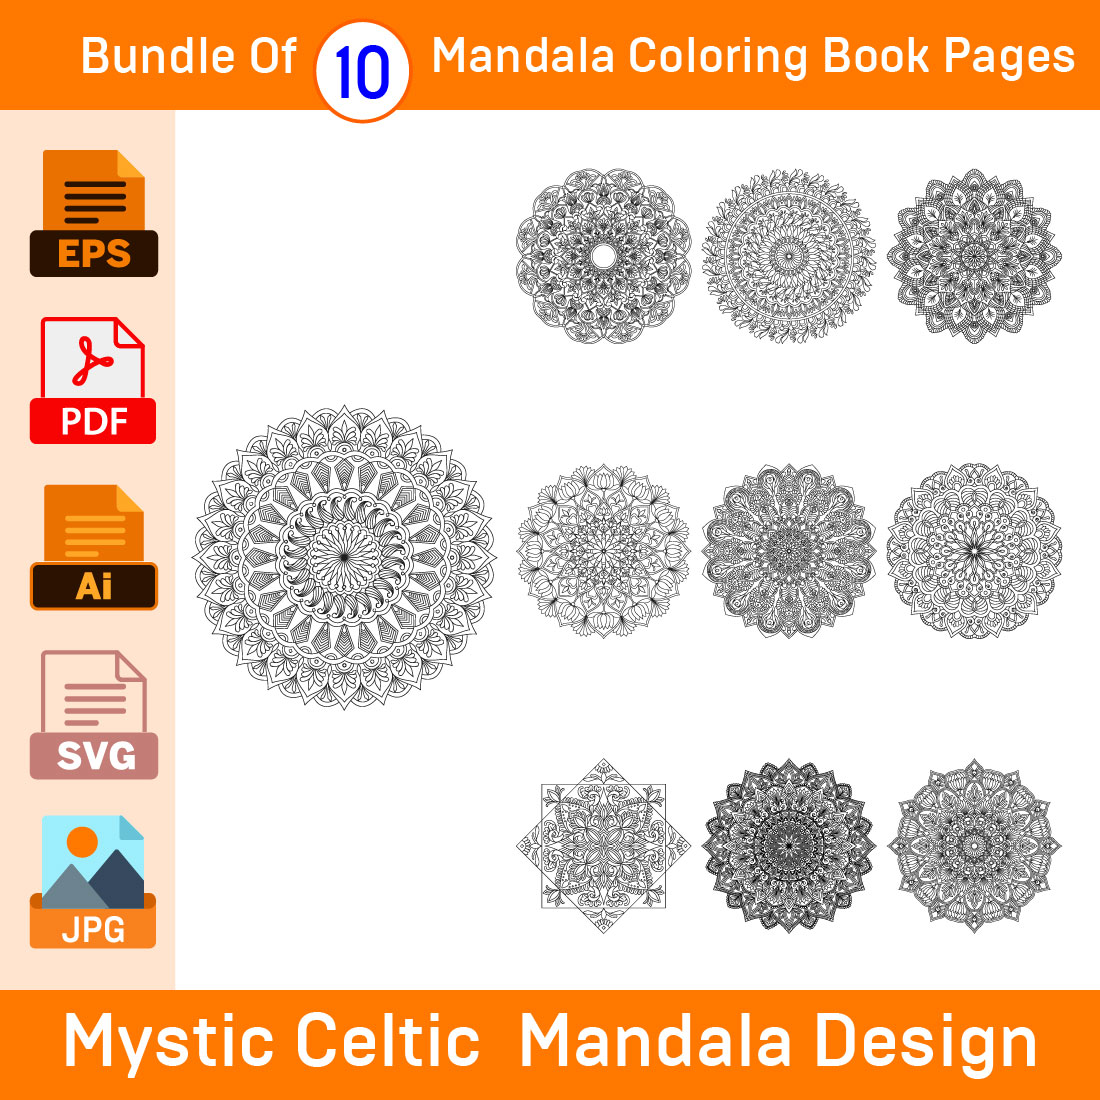 Bundle of 10 Tranquil Gardens Mandala Coloring Book Pages cover image.